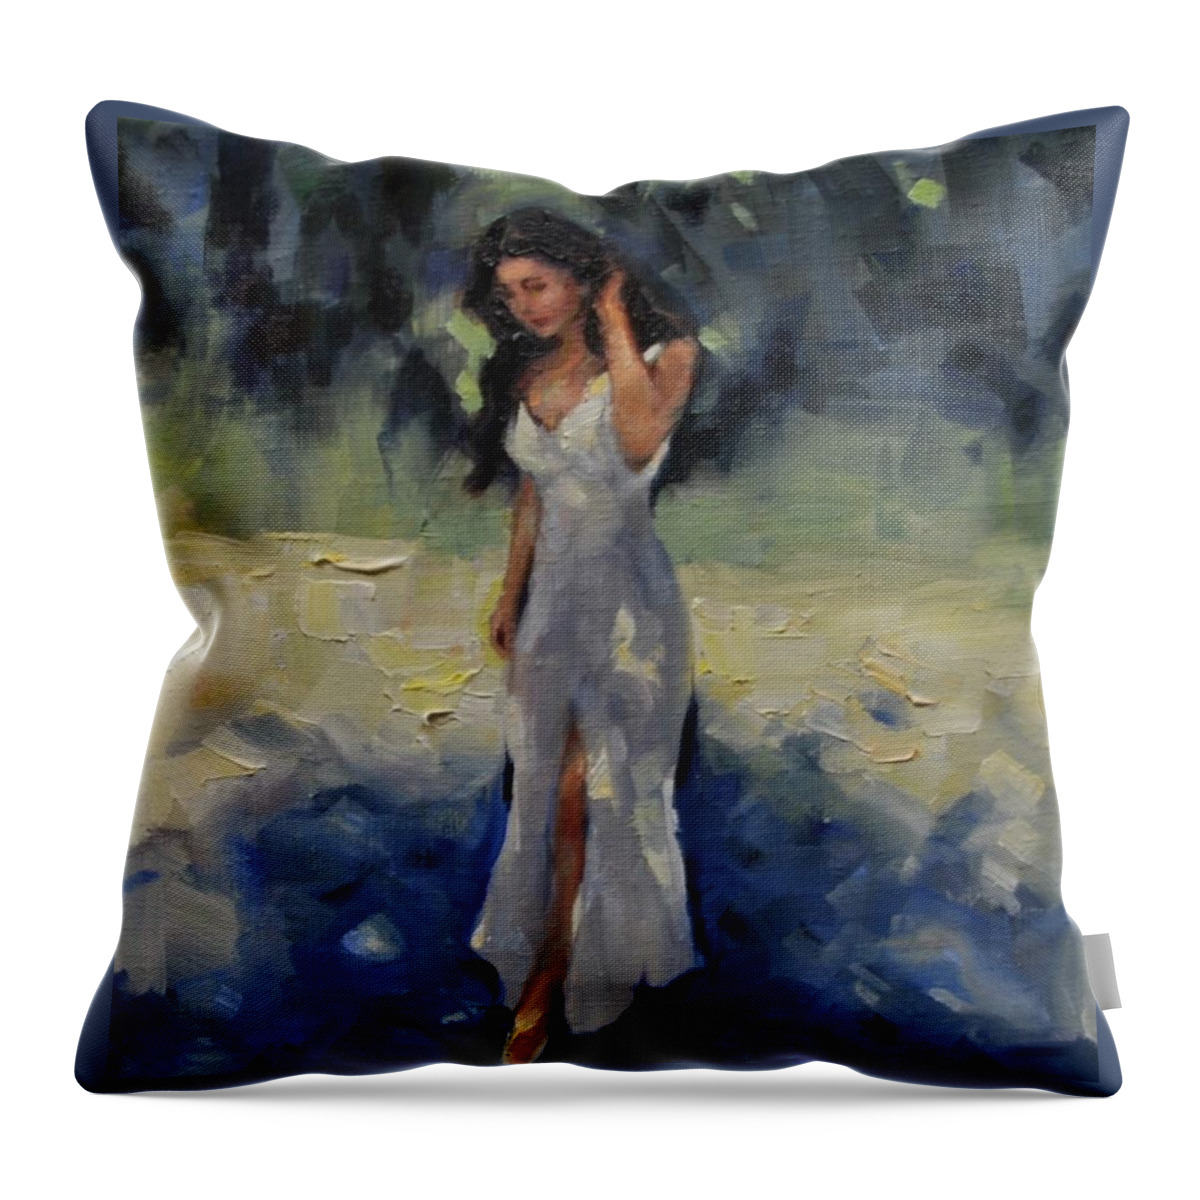 Women Throw Pillow featuring the painting Visions of Sapphires by Ashlee Trcka